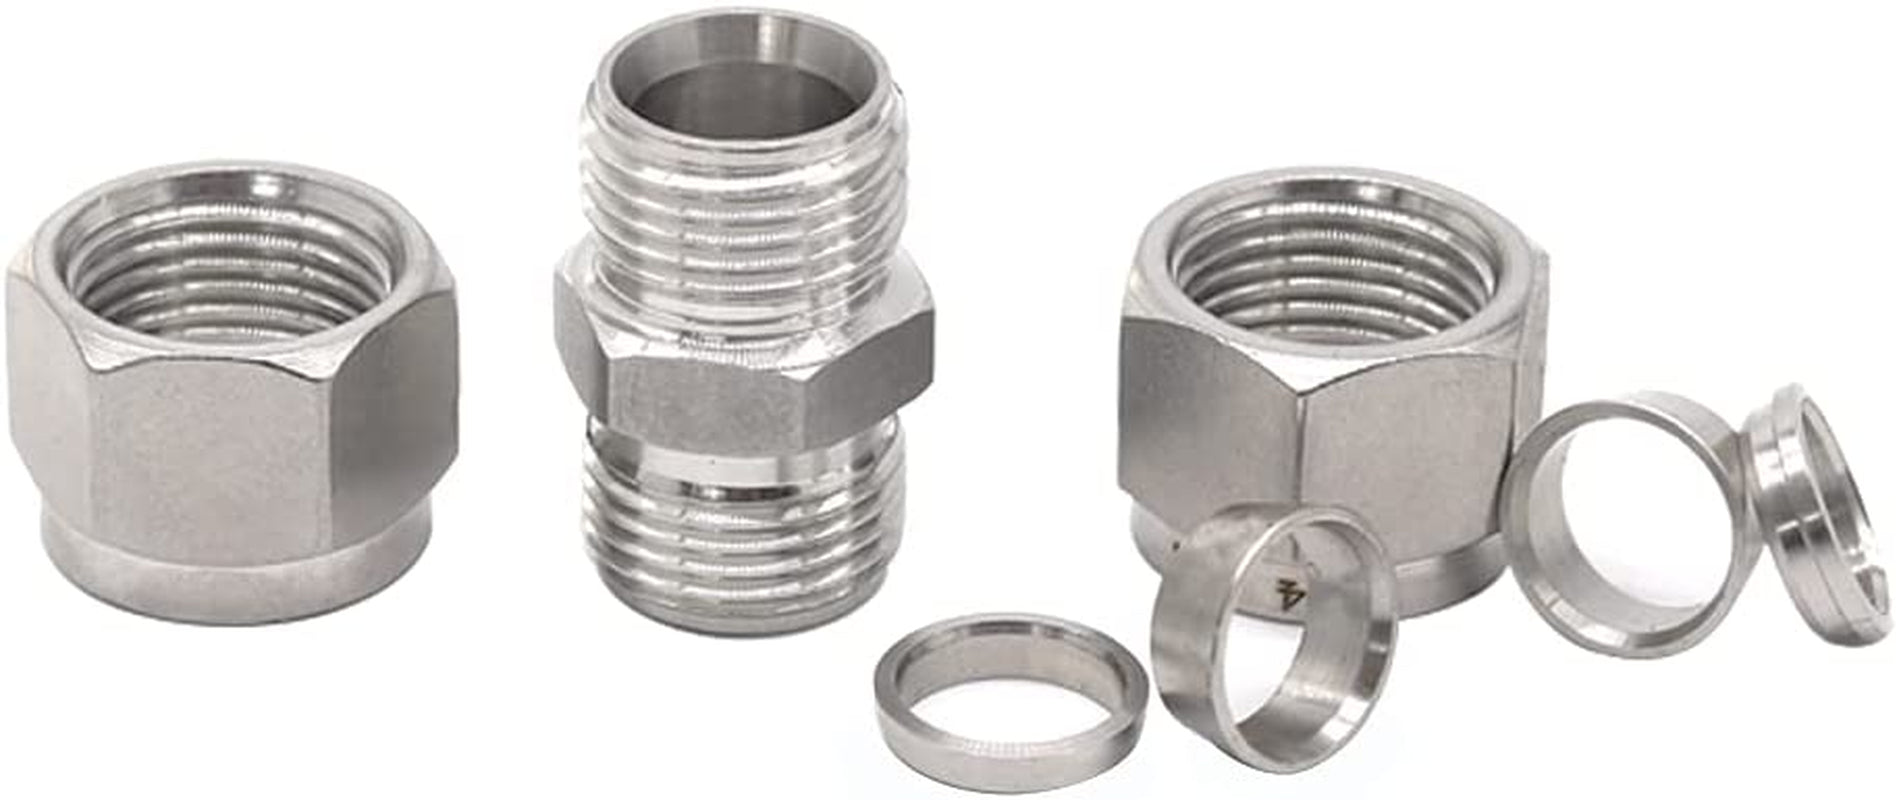 Metric 304 Stainless Steel Compression Tube Fitting, Union, W/Double Ferrule, 10Mm Tube OD X 10Mm Tube OD (2 Pcs)